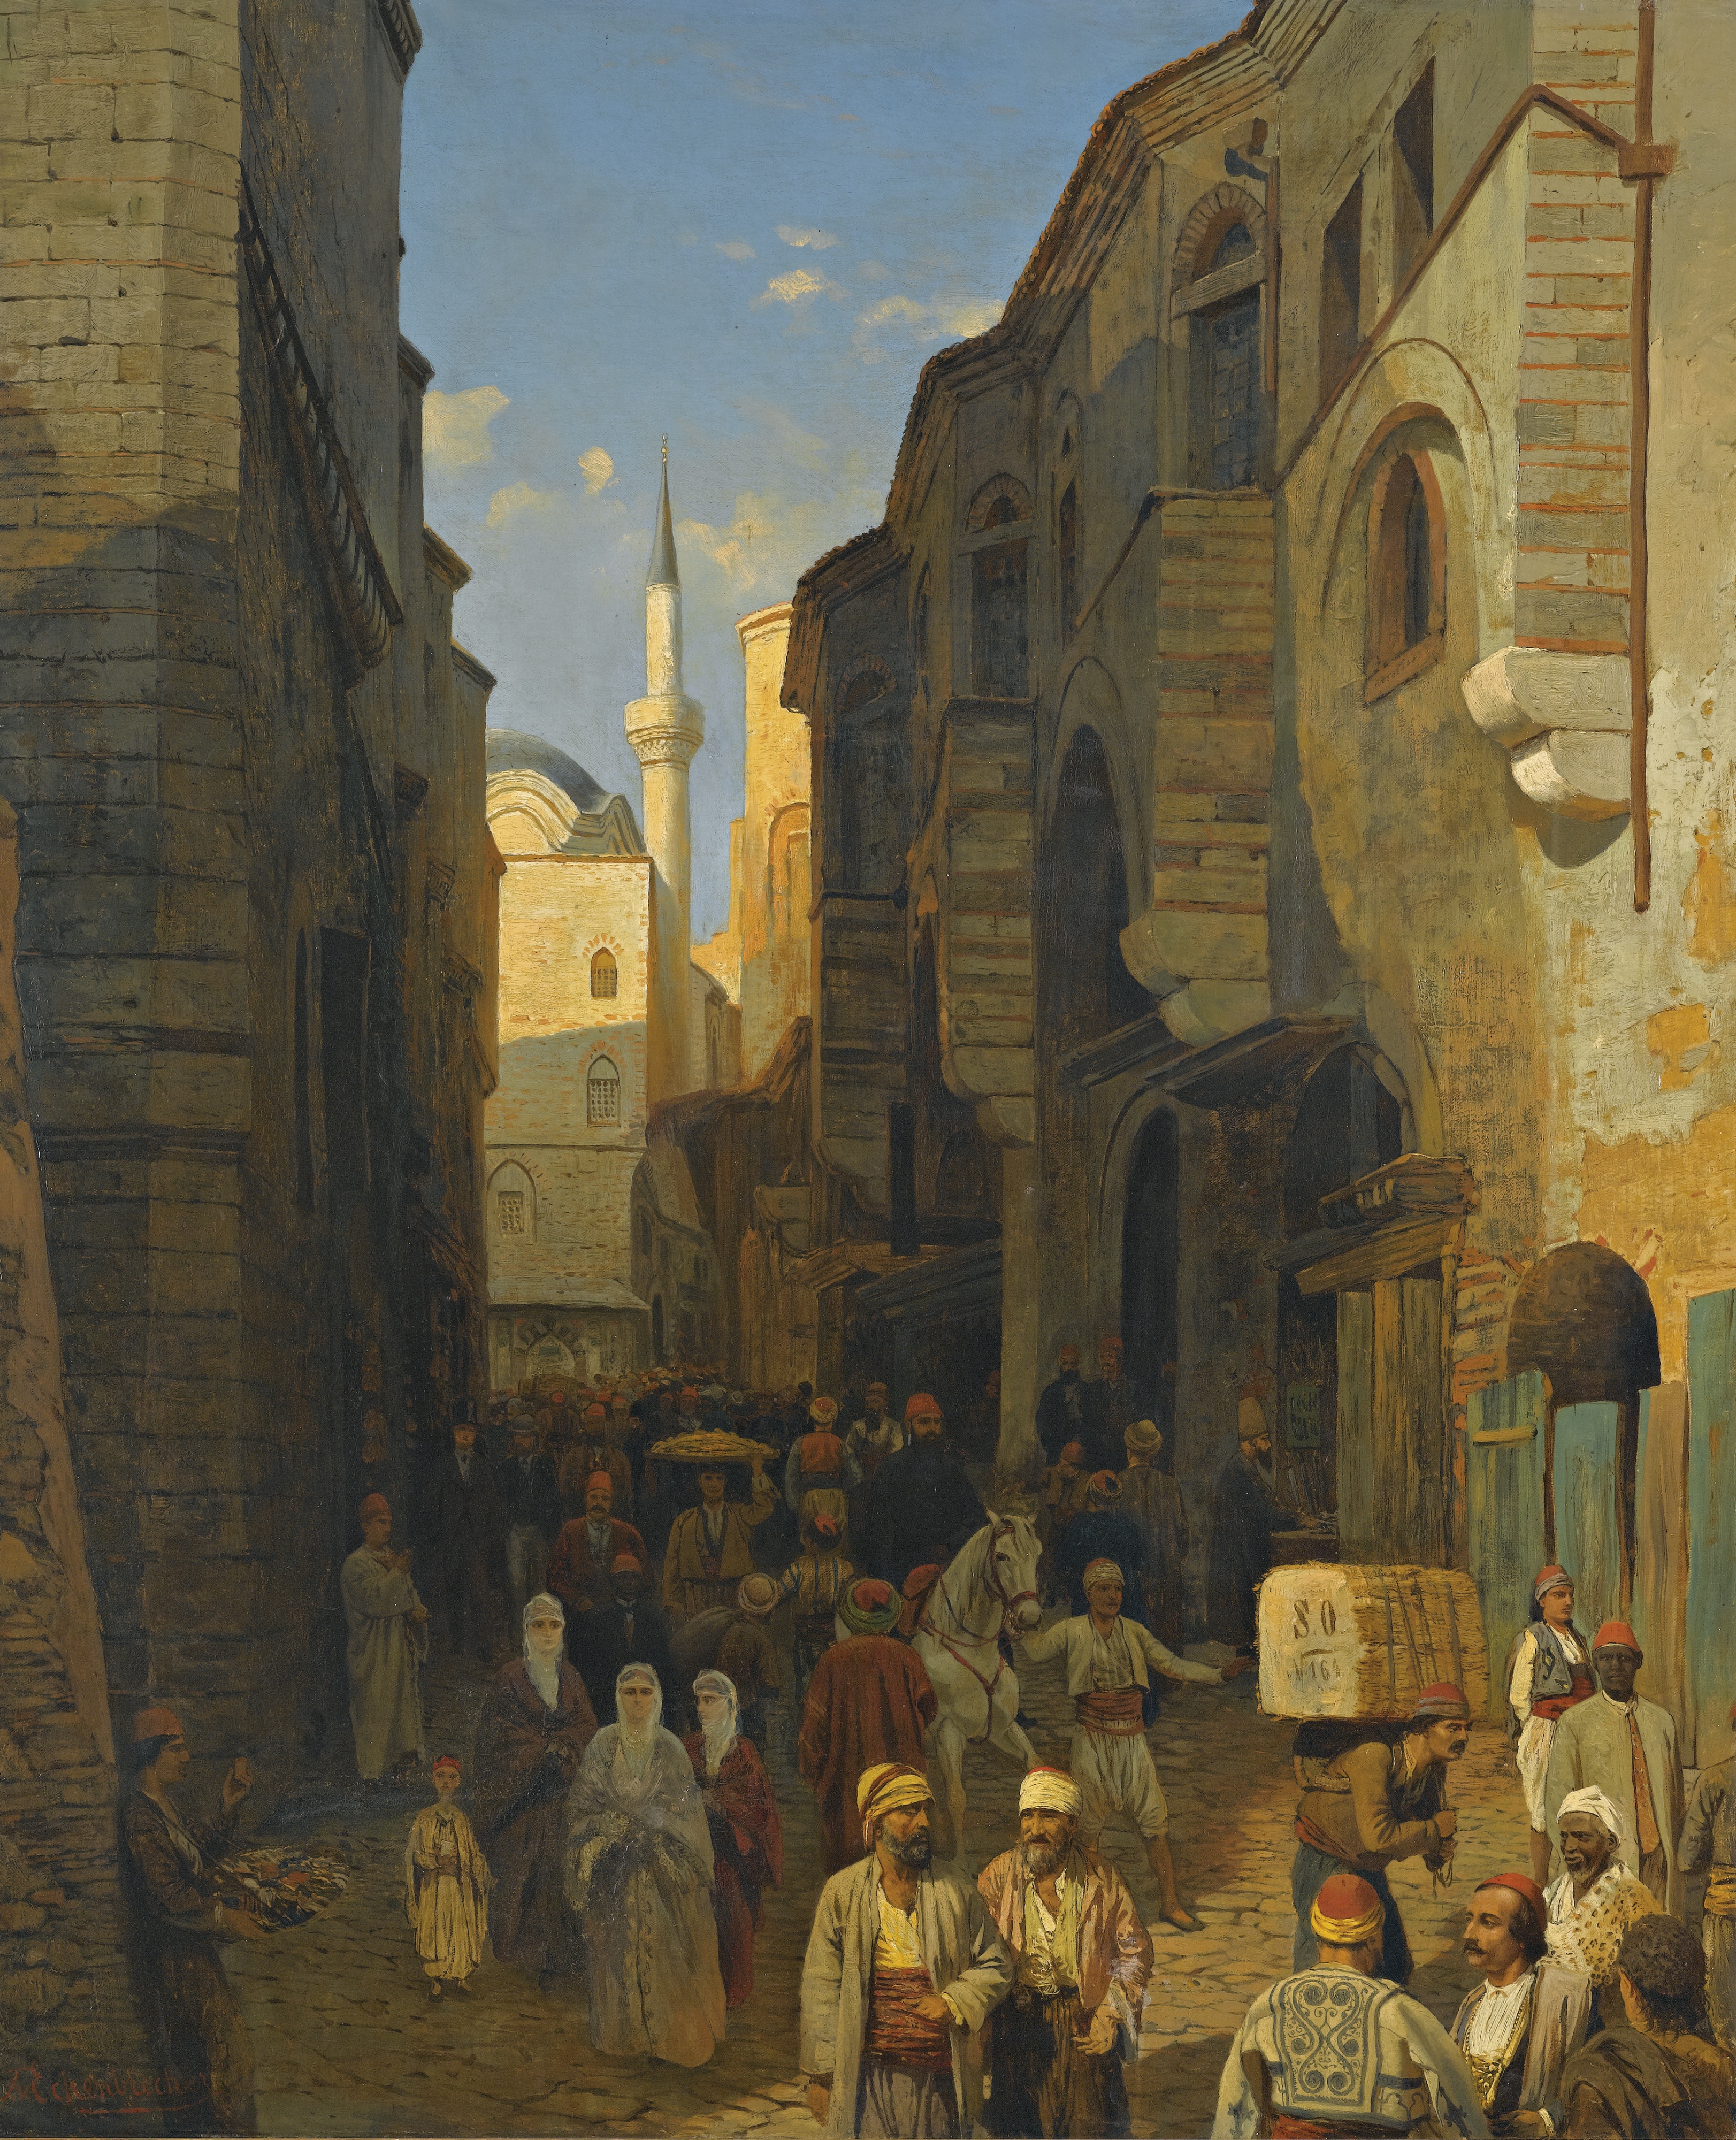 Themistocles von Eckenbrecher - A Busy Street in Tangiers, 1876